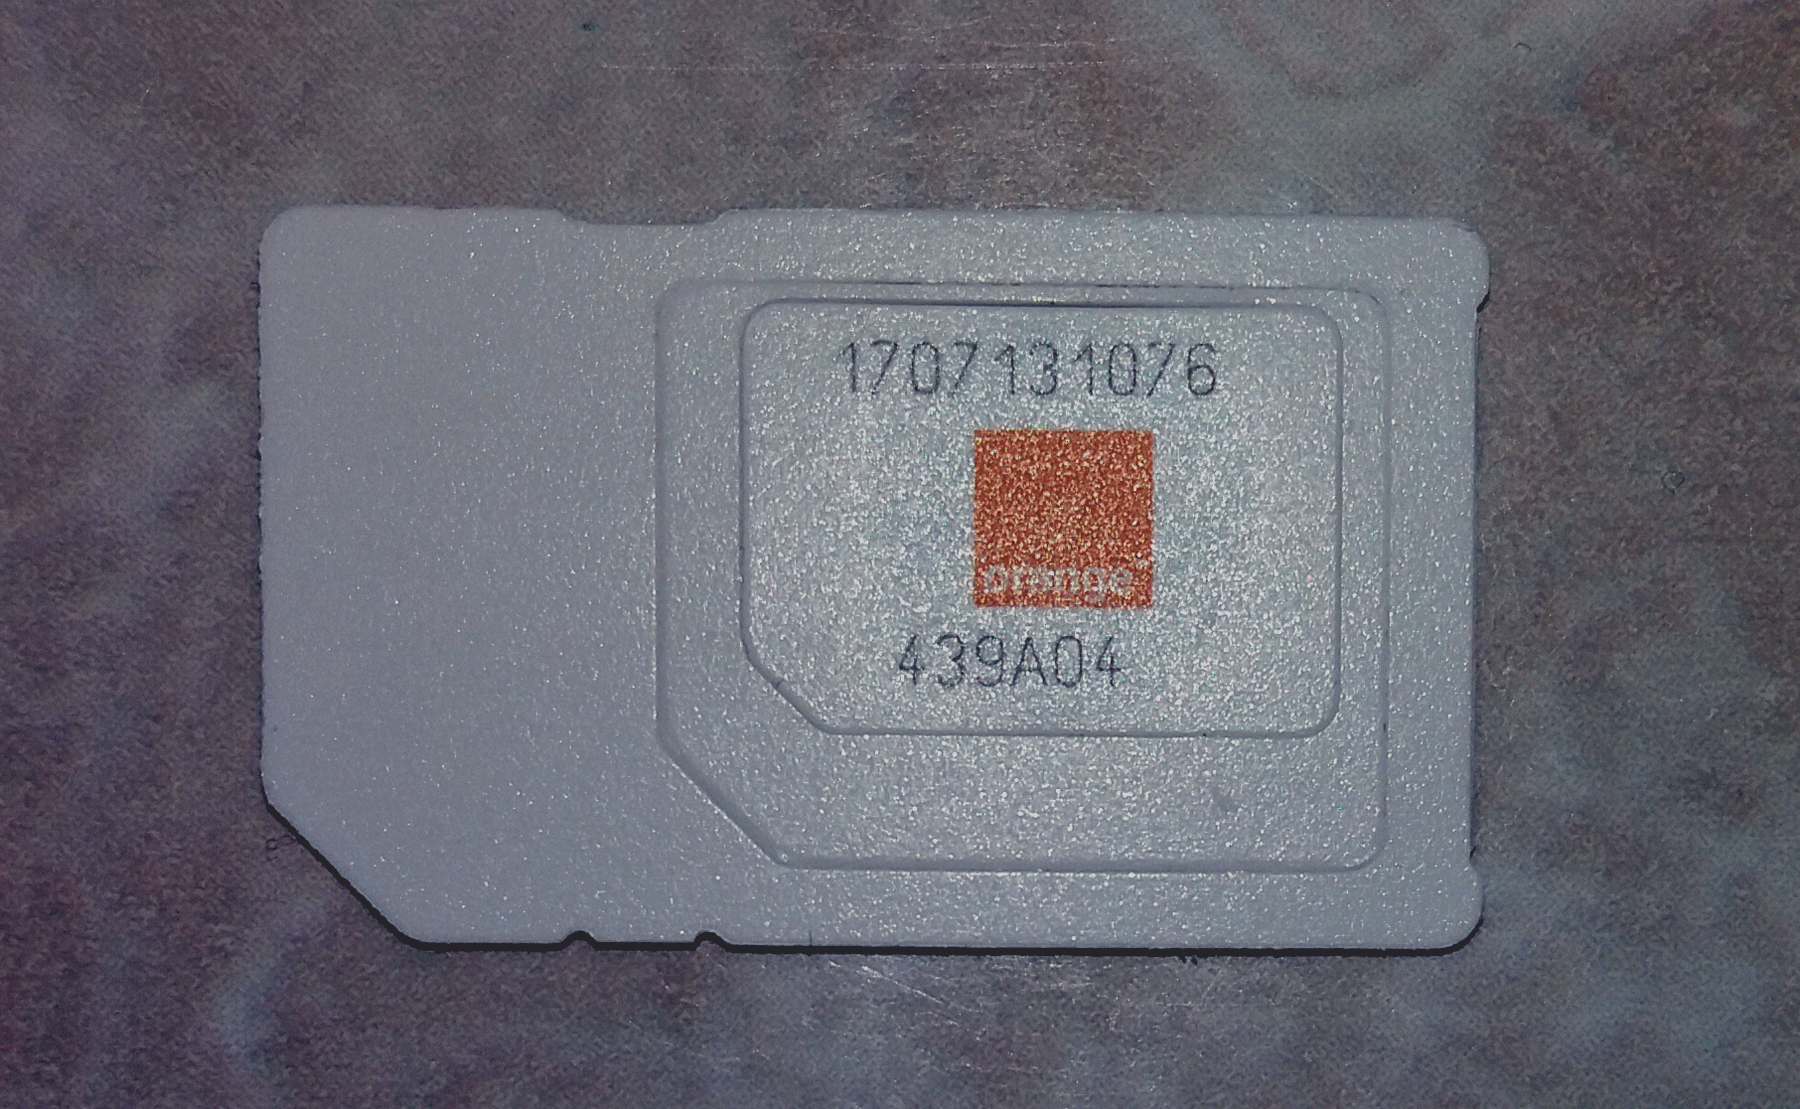 breakable SIM card for 4G, 3G, 2G GSM shields